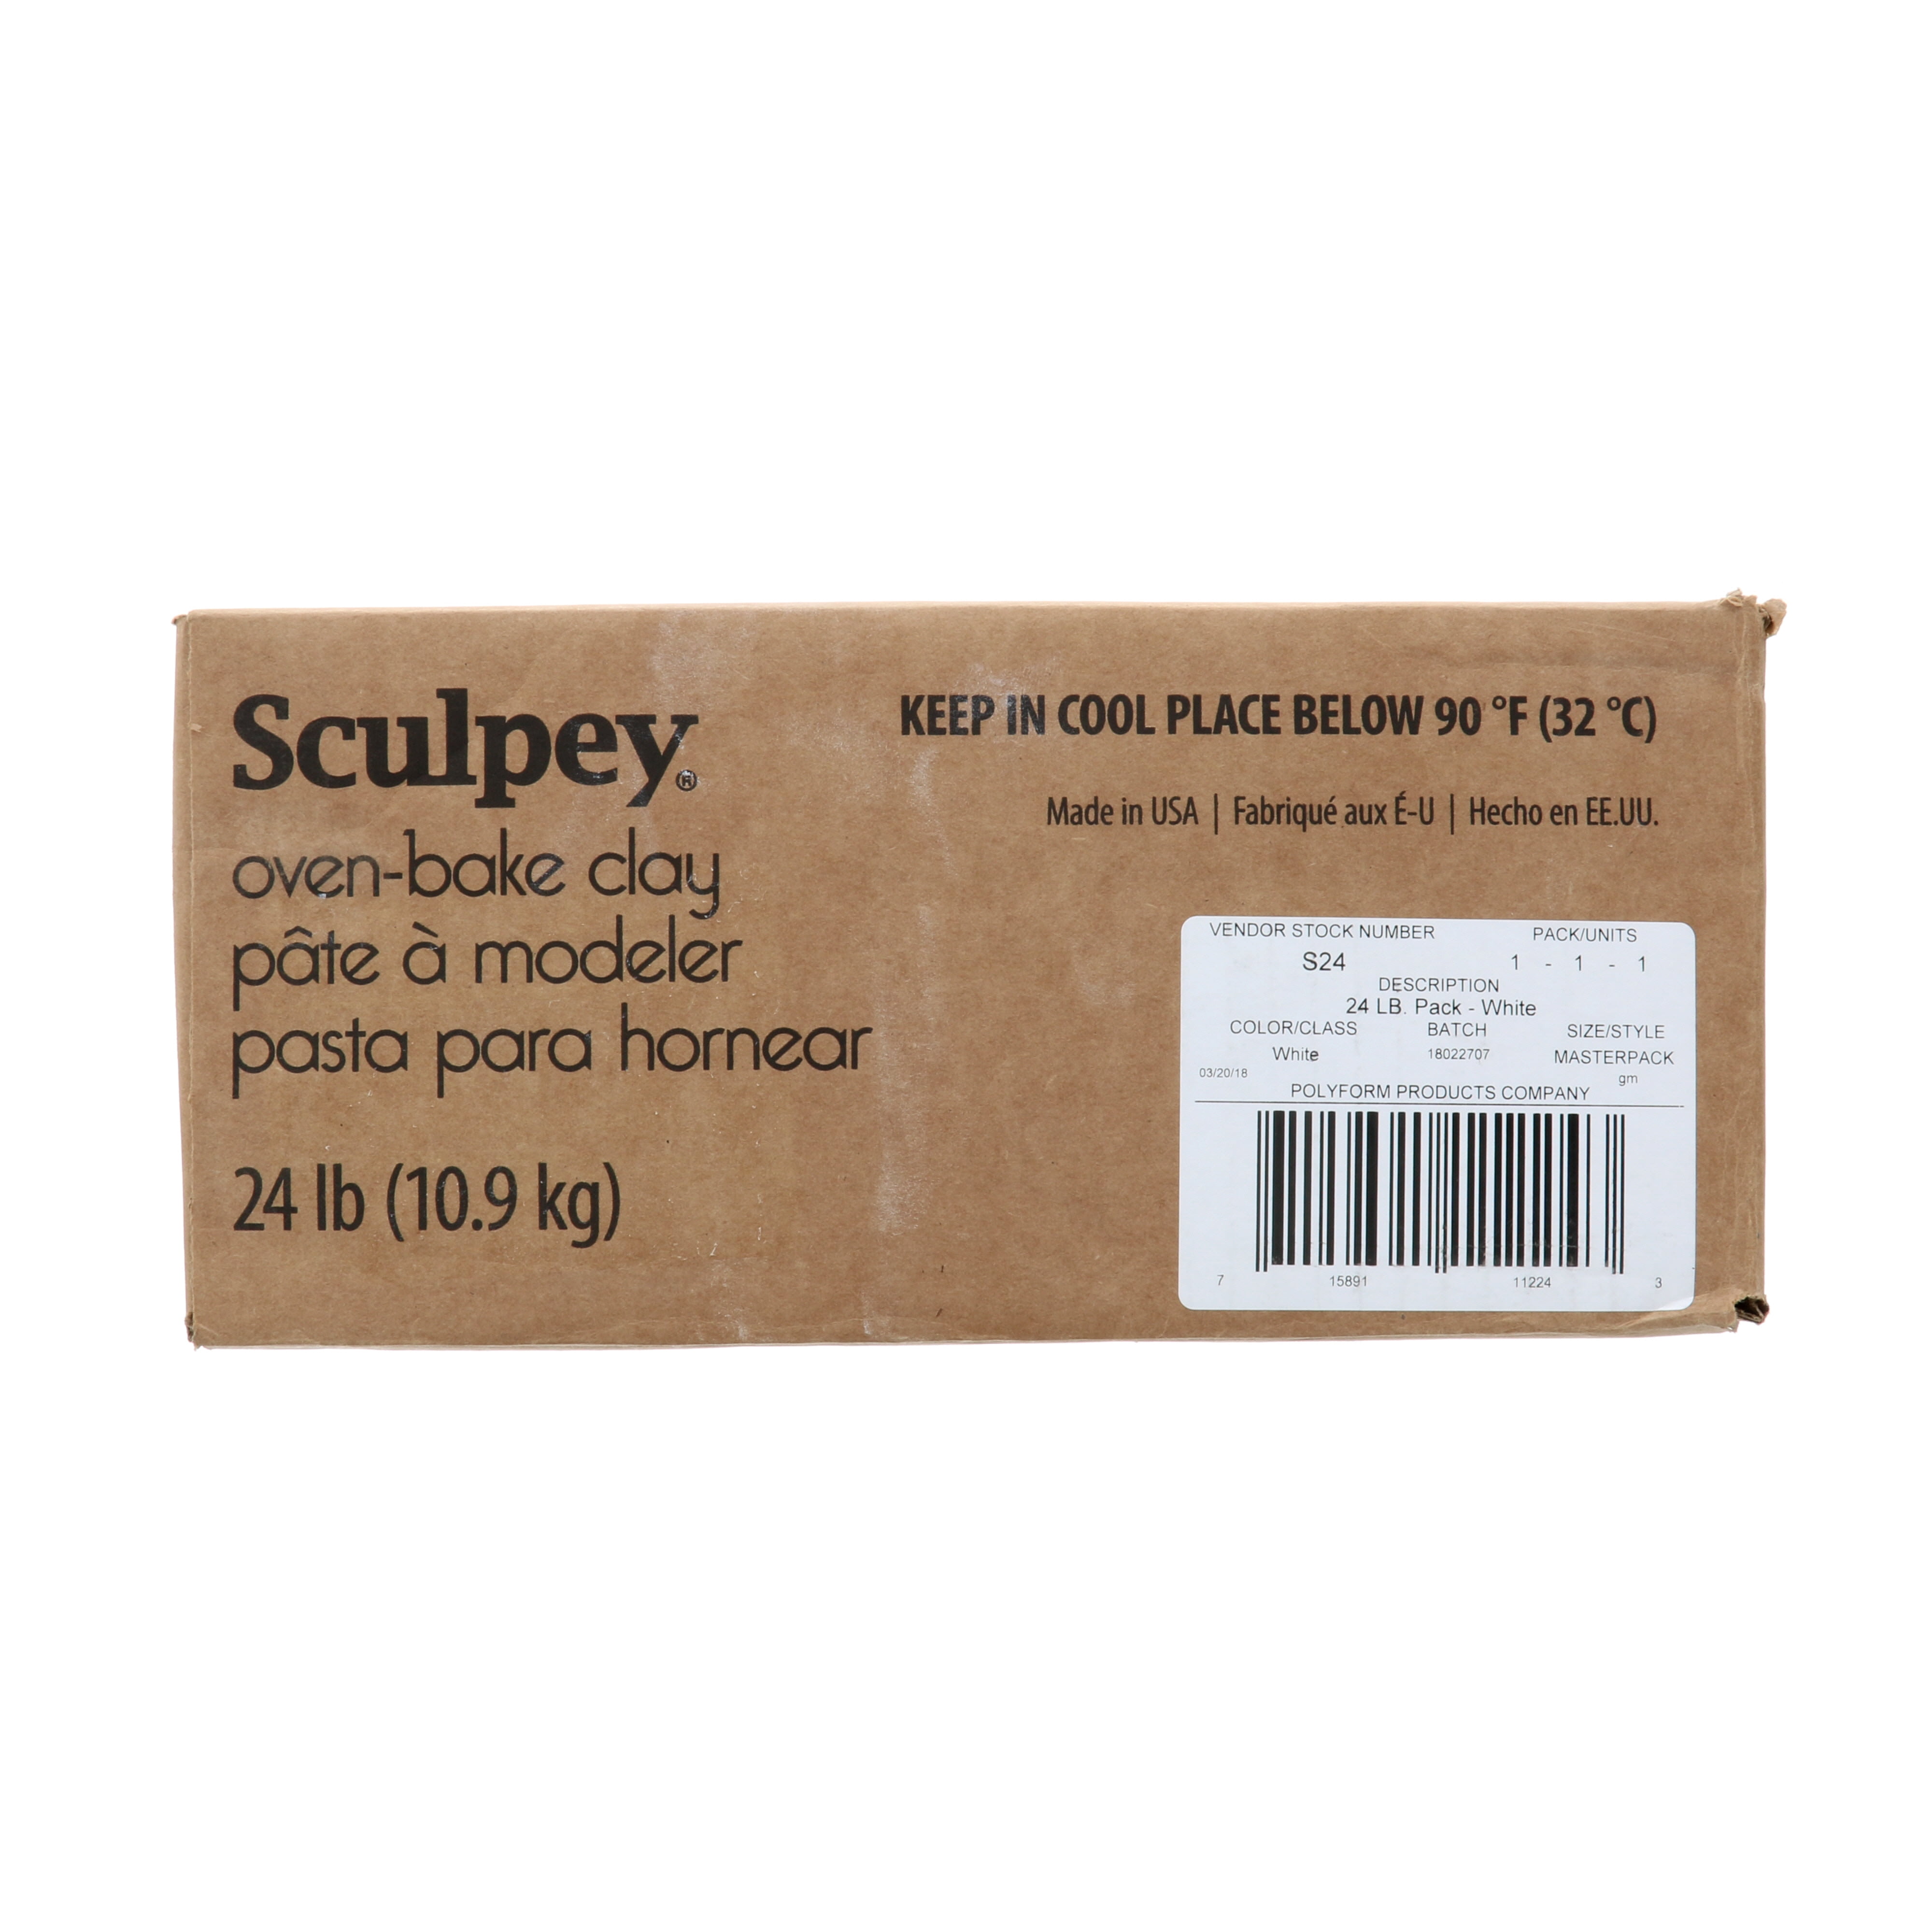 Original Sculpey White, Non Toxic, Polymer clay, Oven Bake Clay, 24 pounds  Bulk Pack great for modeling, sculpting, holiday, classrooms, camps, DIY